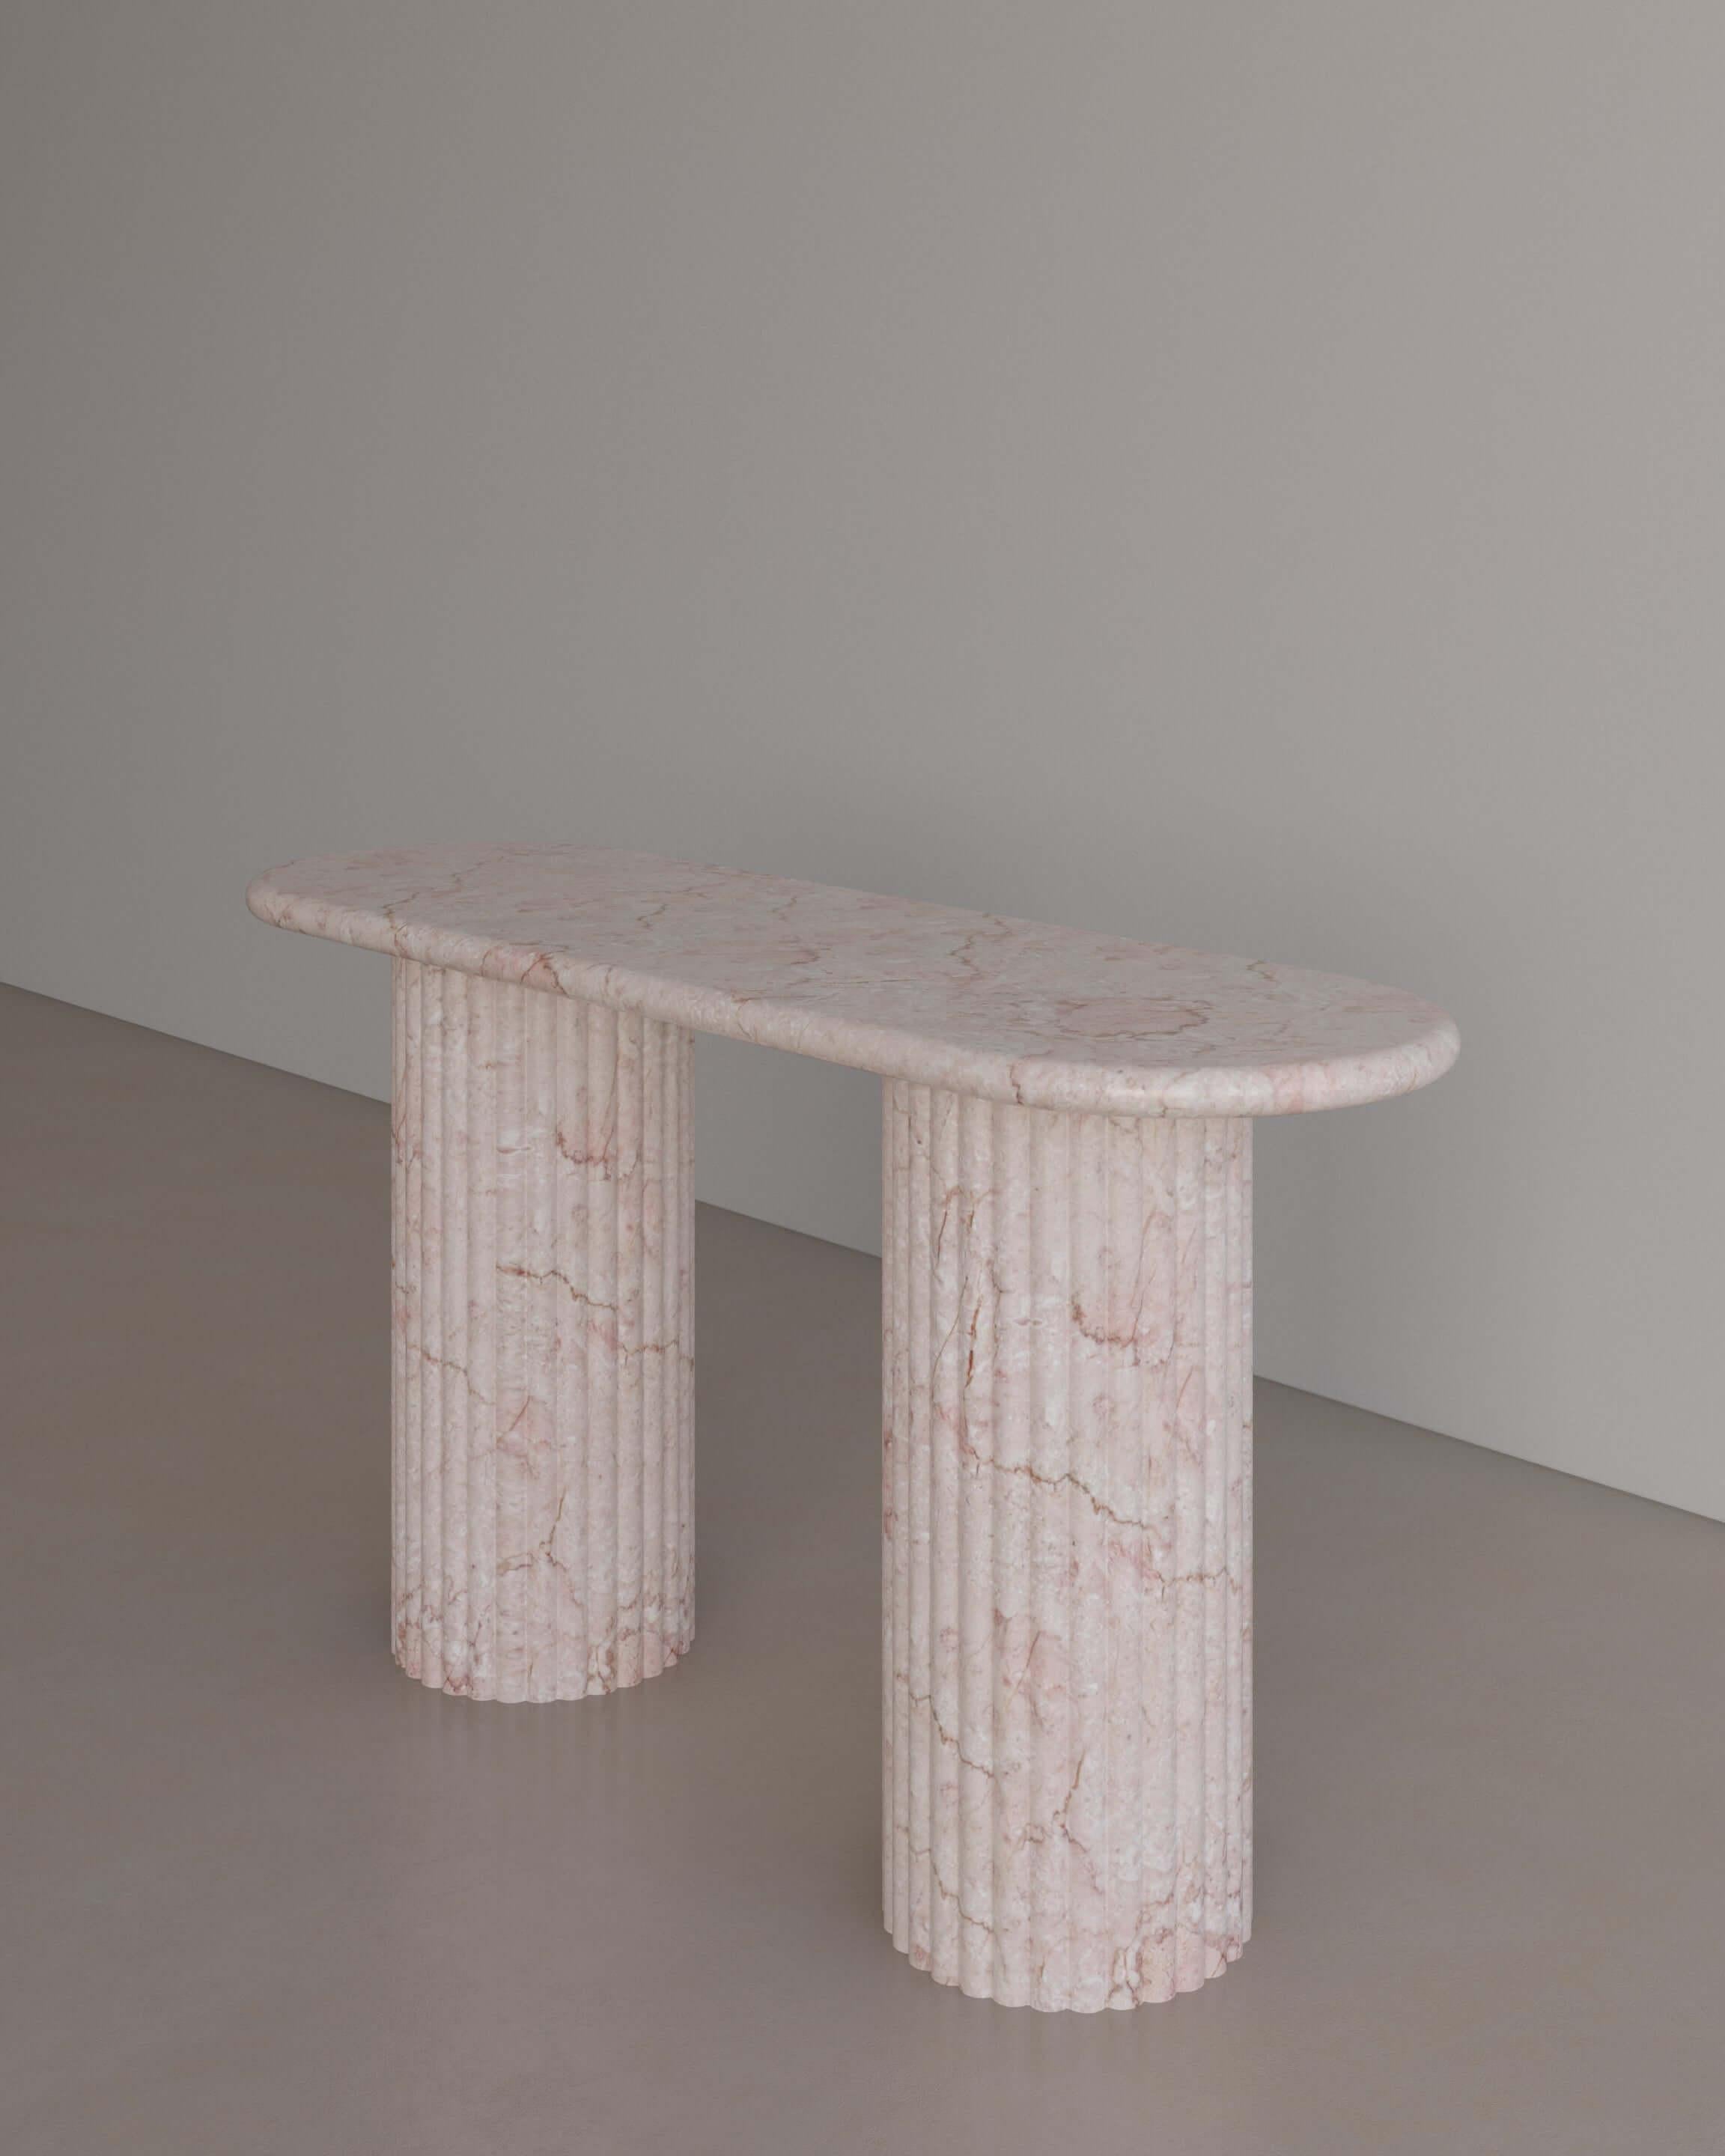 The Essentialist presents The Antica Console table in Afshar Pink Marble. Featuring two Roman-style pillars, used throughout the Empire’s history to celebrate conquest and victory. Featuring a sensuous, elongated oval top with bullnose edges resting